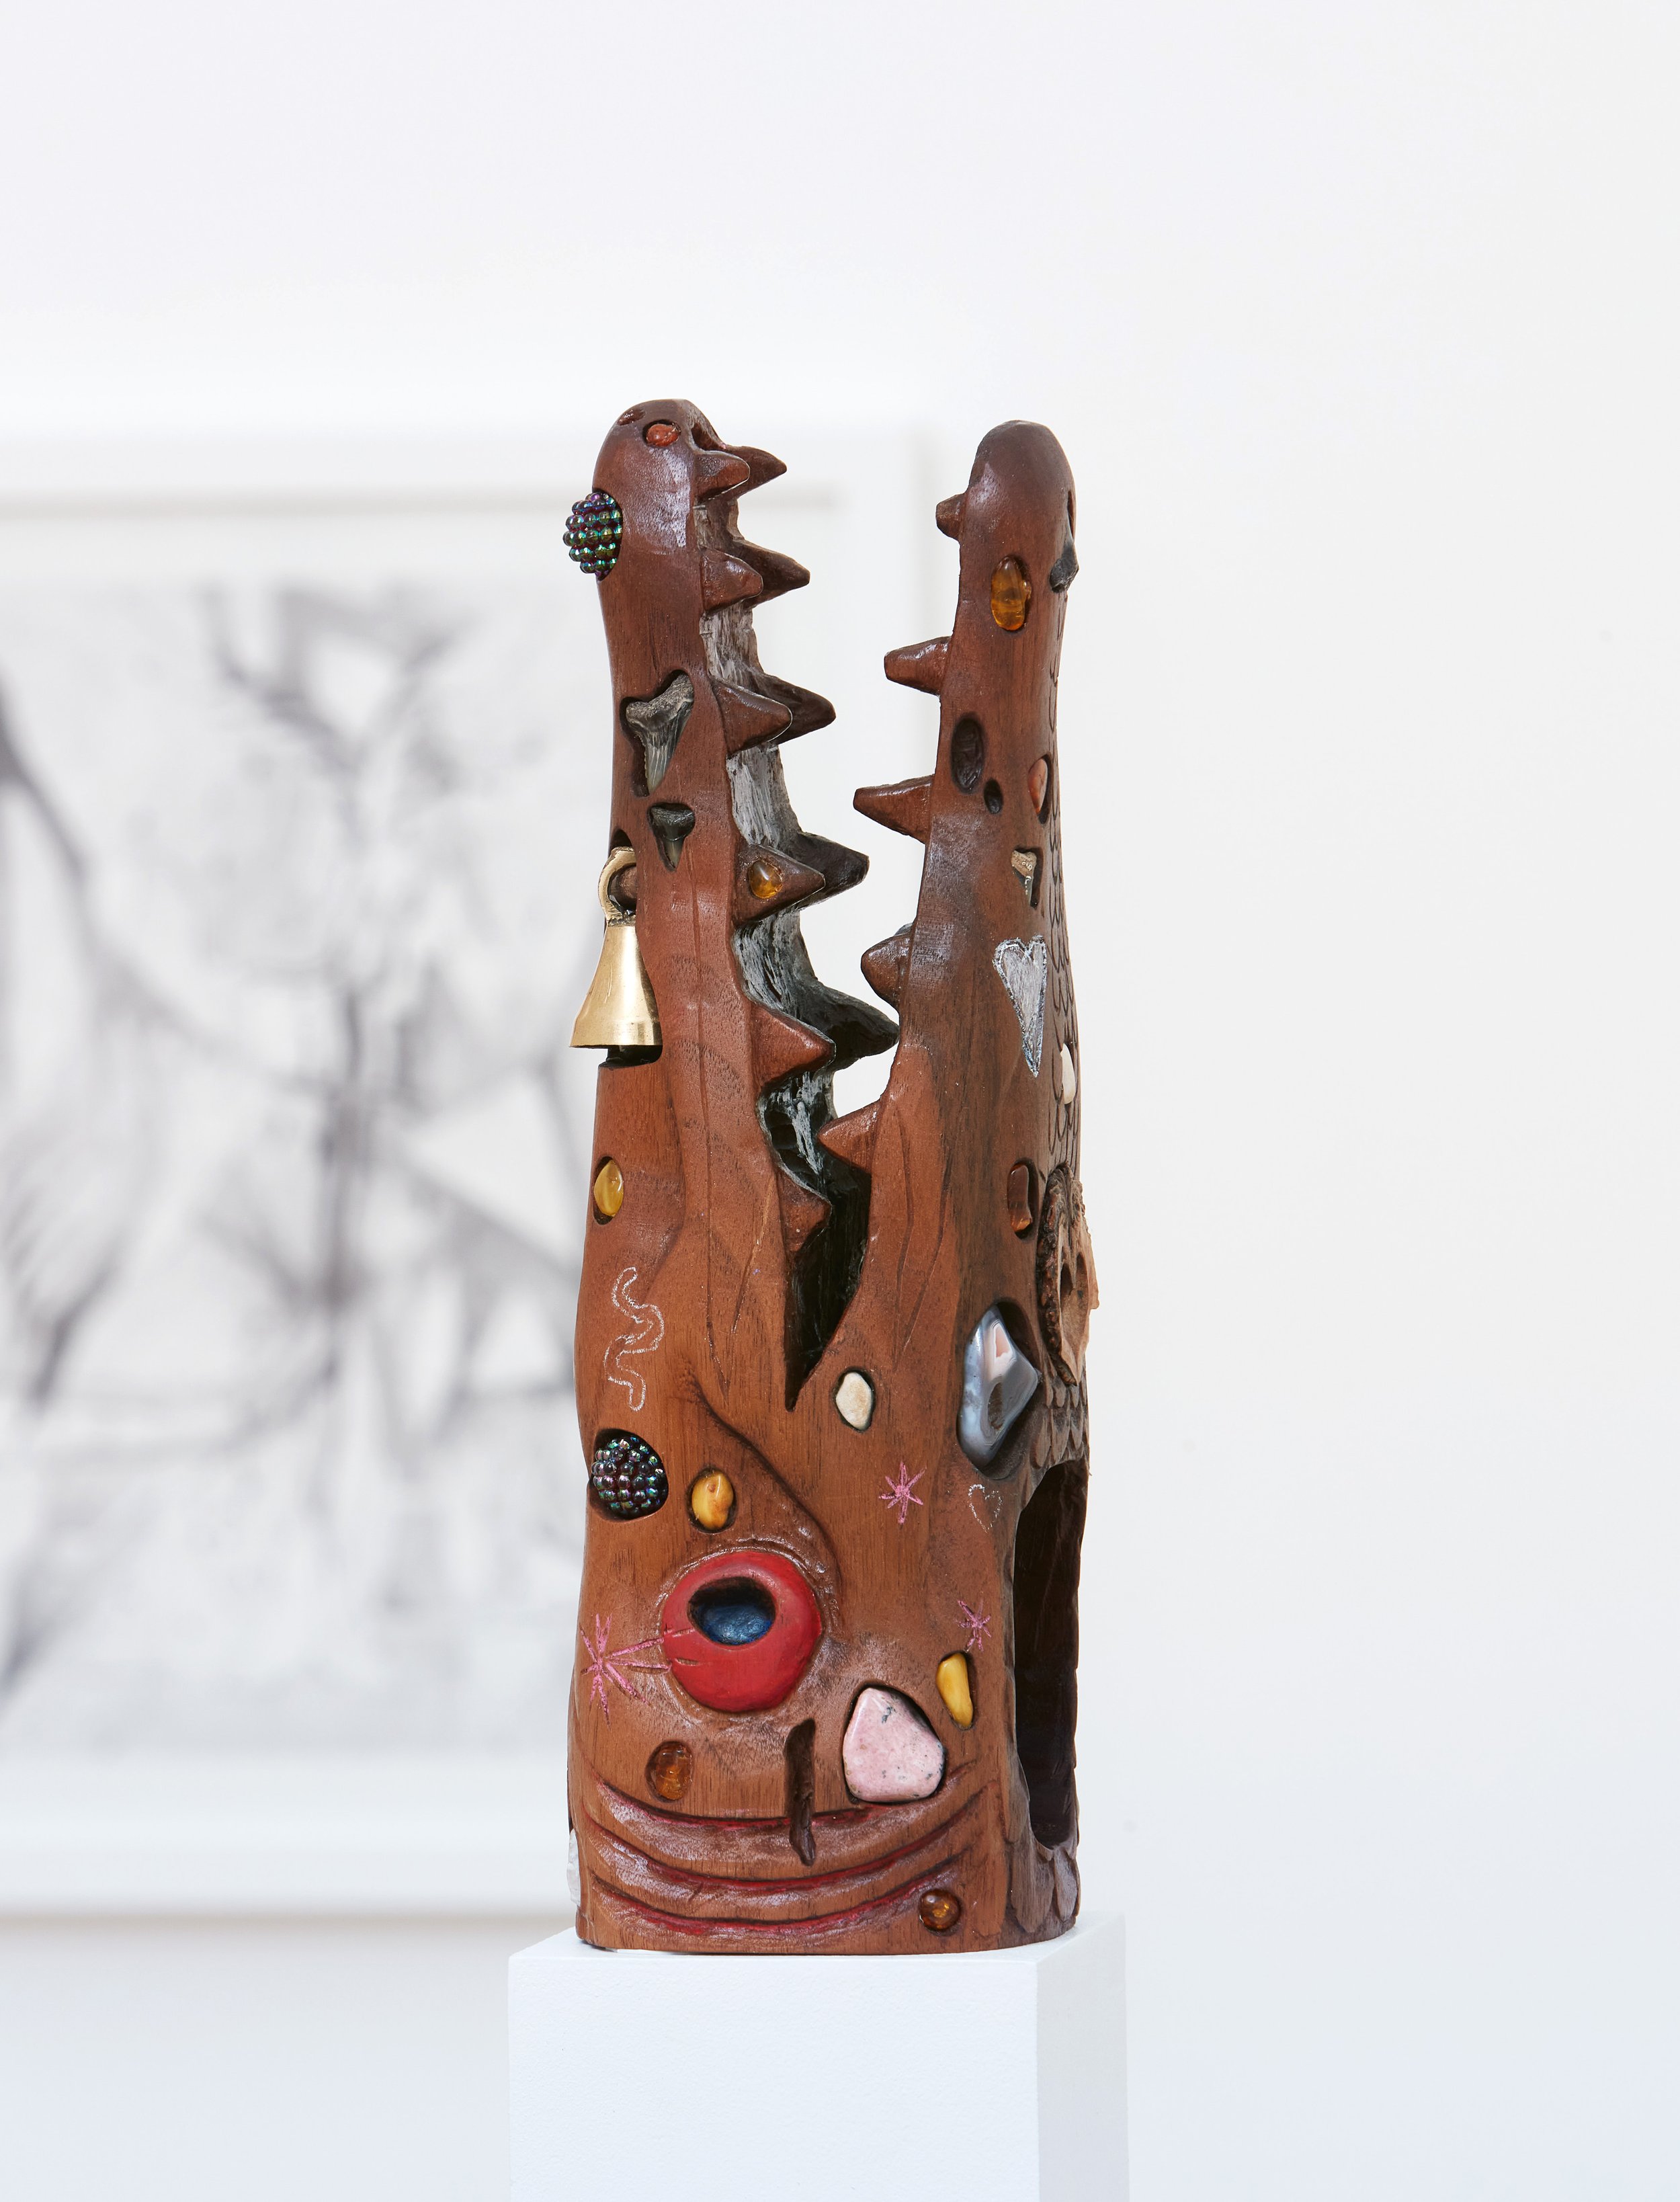   Alligator Gar , 2019 - 2022, fossils, rocks, crystals, amber, beads, nut, plastic toy, metal bell, and colored pencil on carved walnut, 10.5" x 4" x 4 